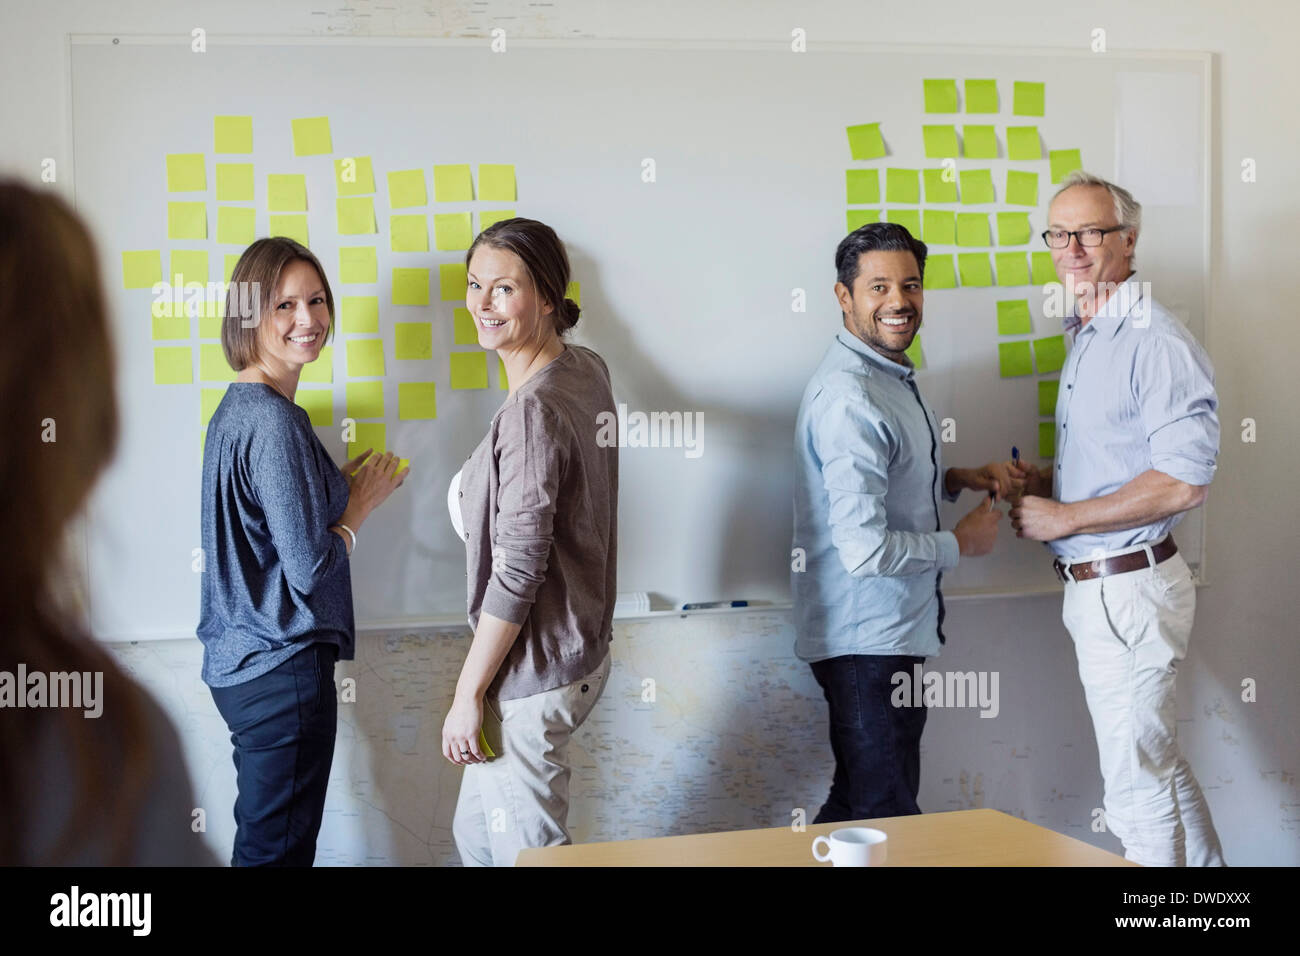 Happy business people standing by whiteboard at office Stock Photo